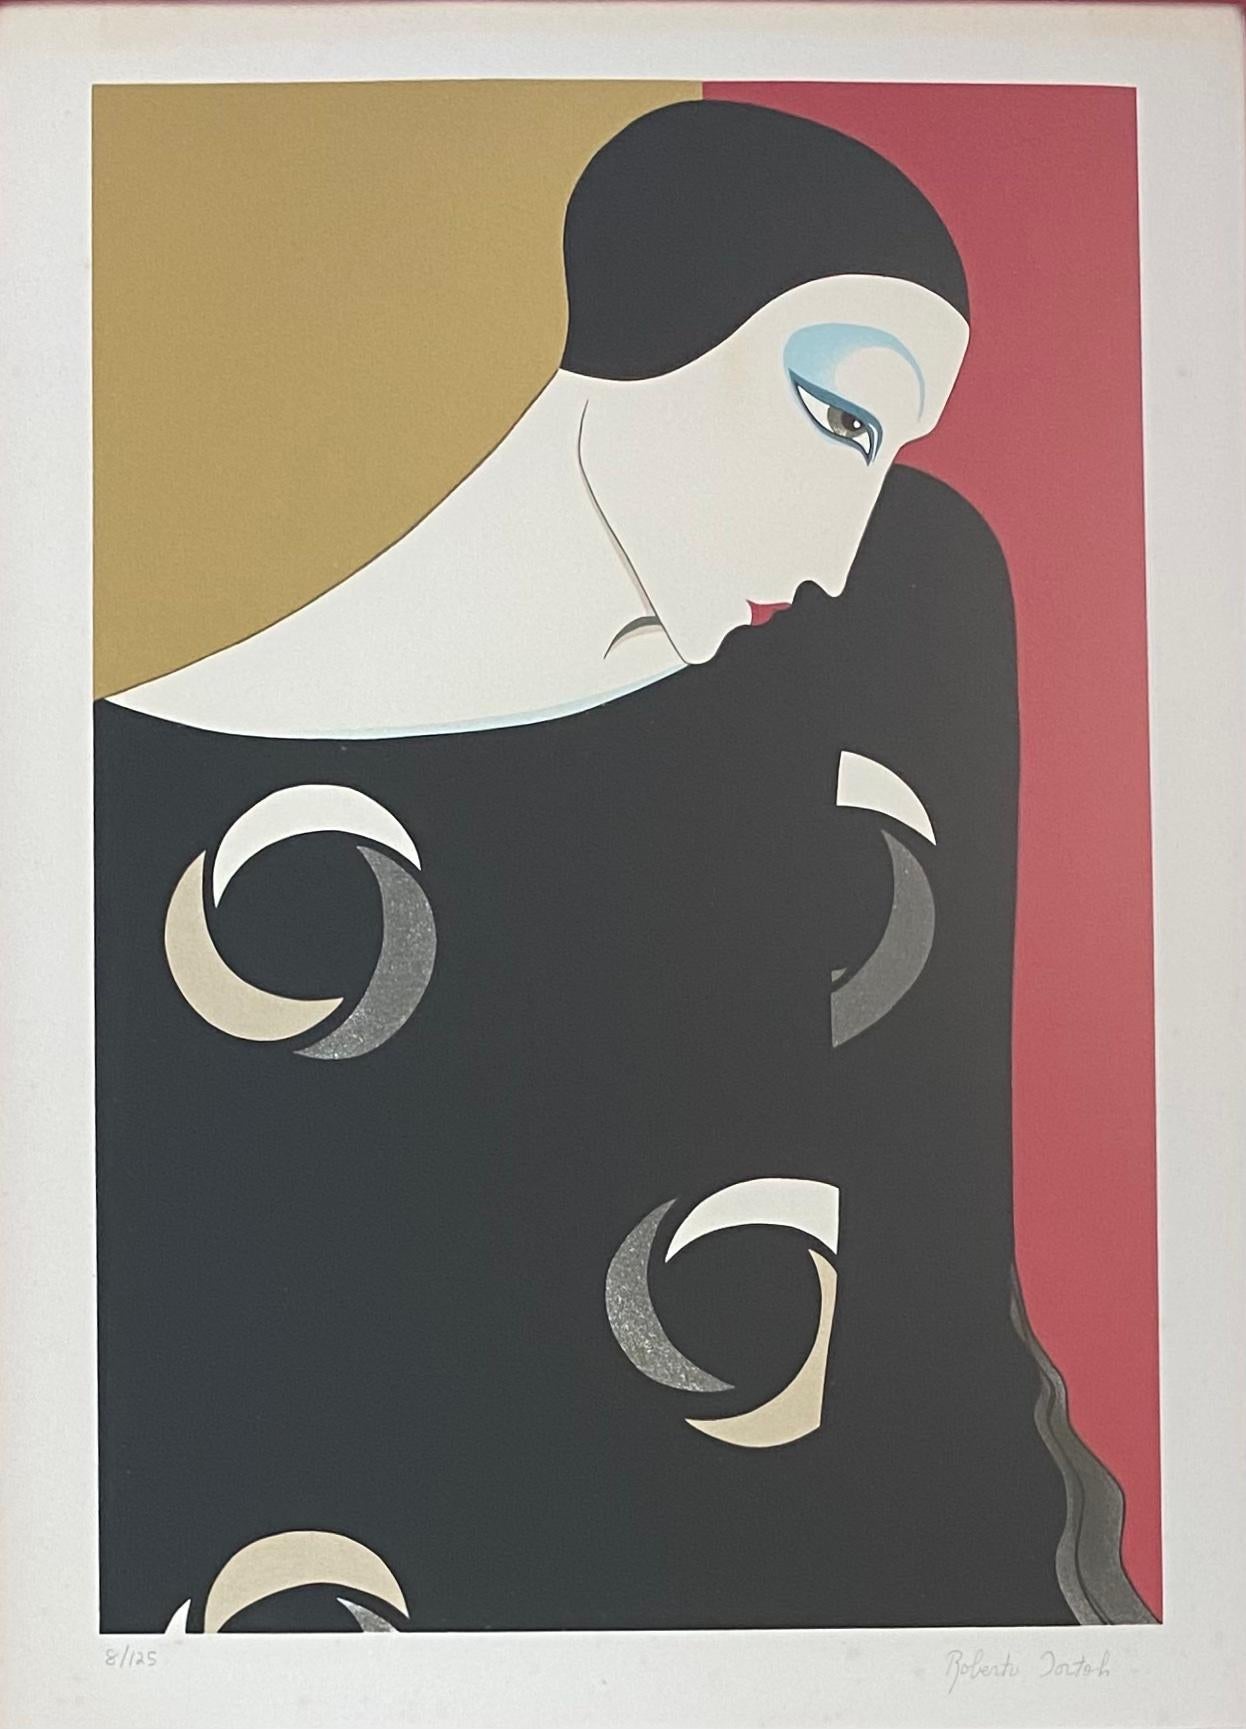 A fine decorative color lithograph in the Art Deco style. 
Signed and Numbered by the artist, Roberto Tortoli (Italian). 

Presented in a custom Hollywood Regency style frame.
Measures: 27 1/4